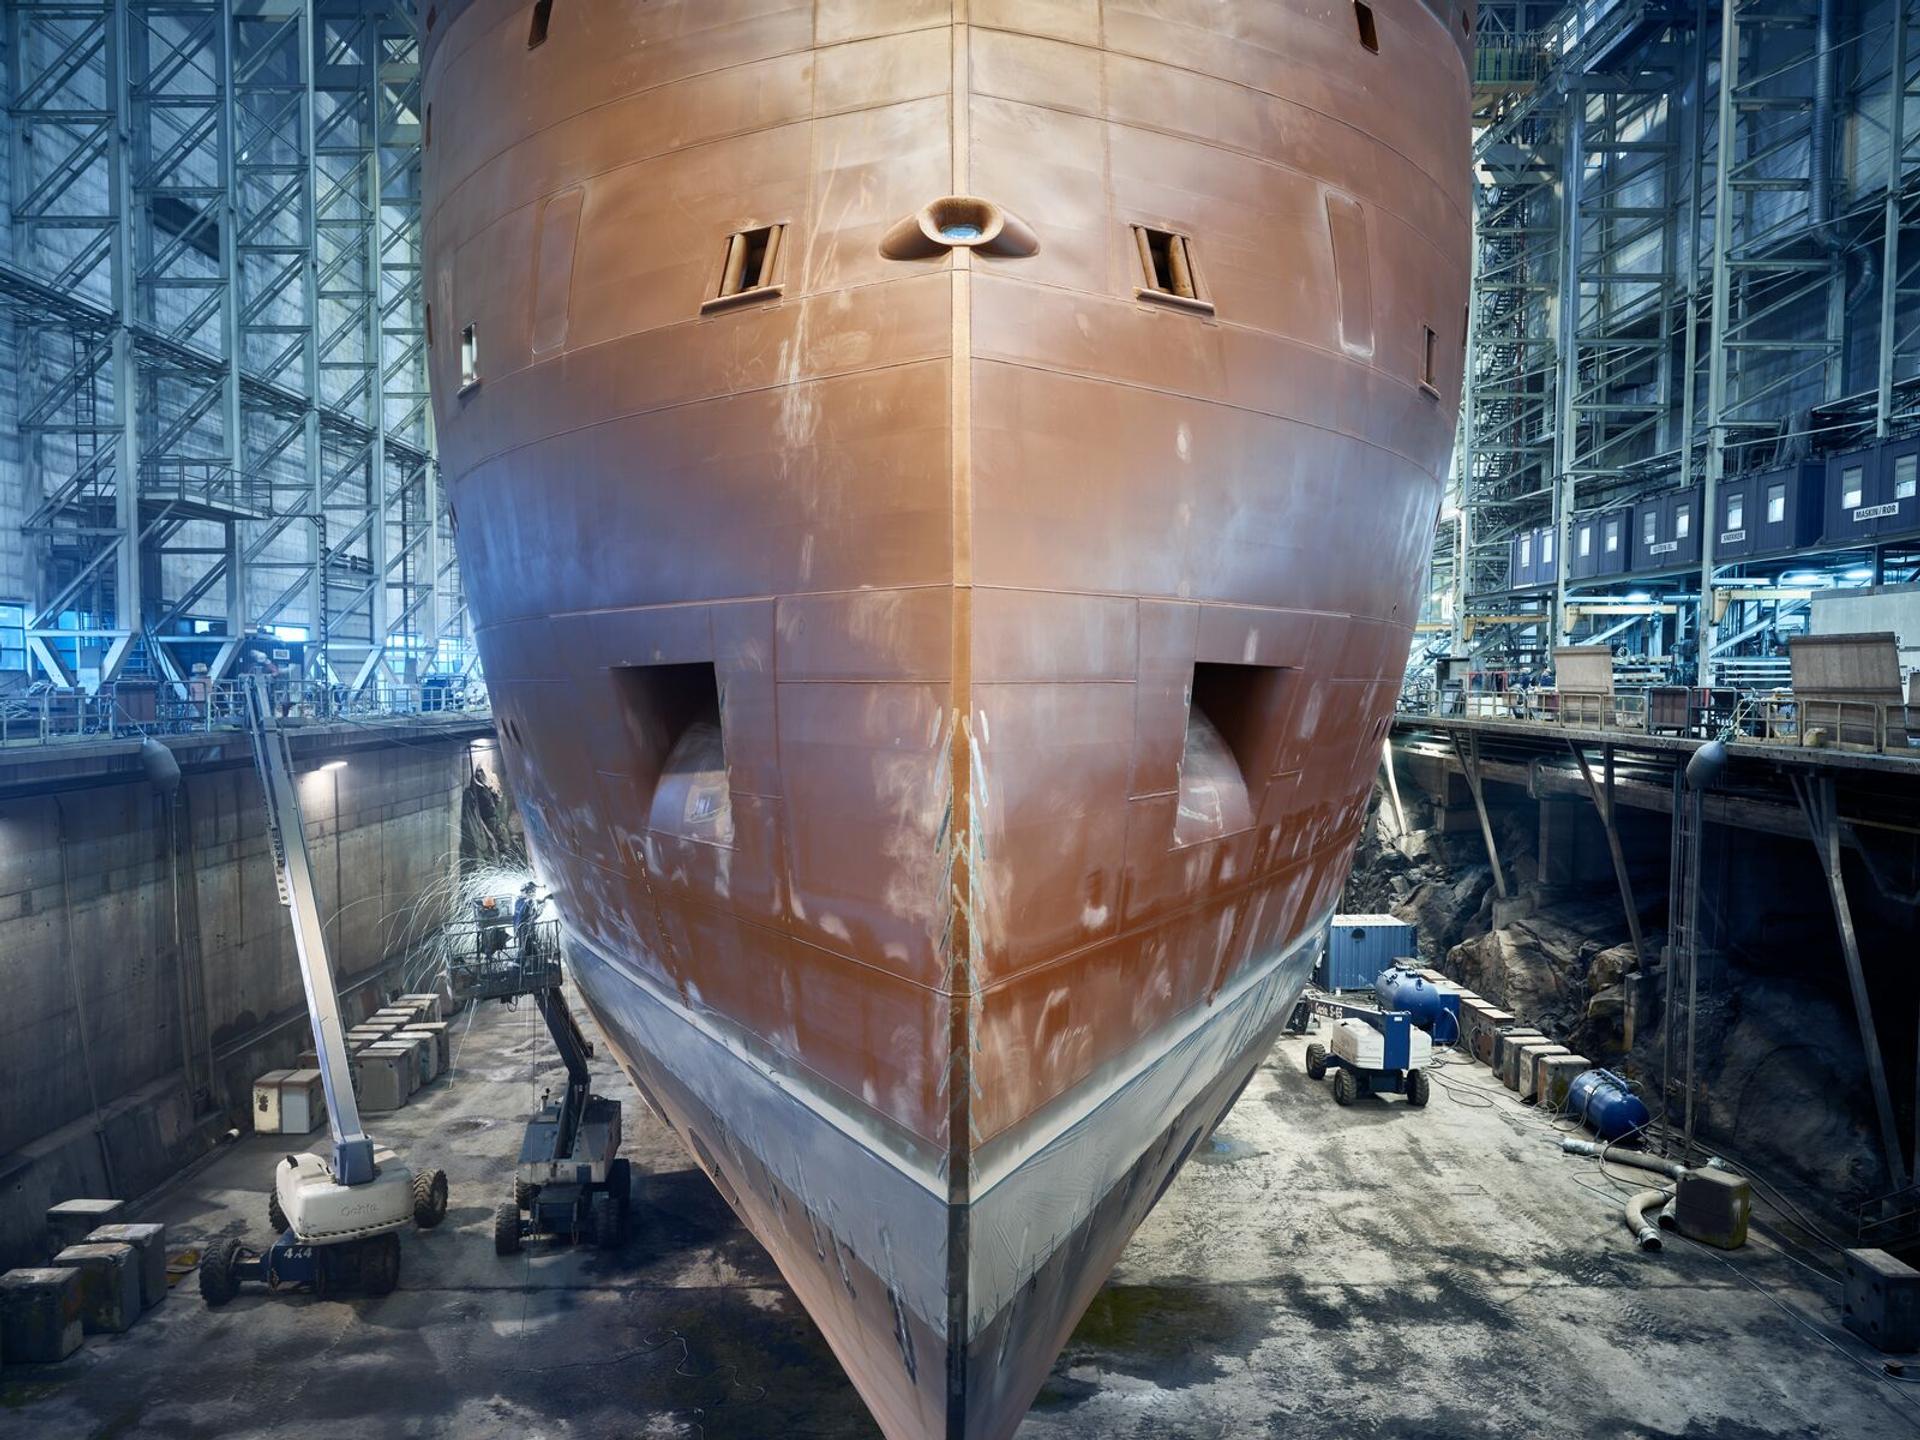 A view of a ship hull being built by Ulstein group in Norway